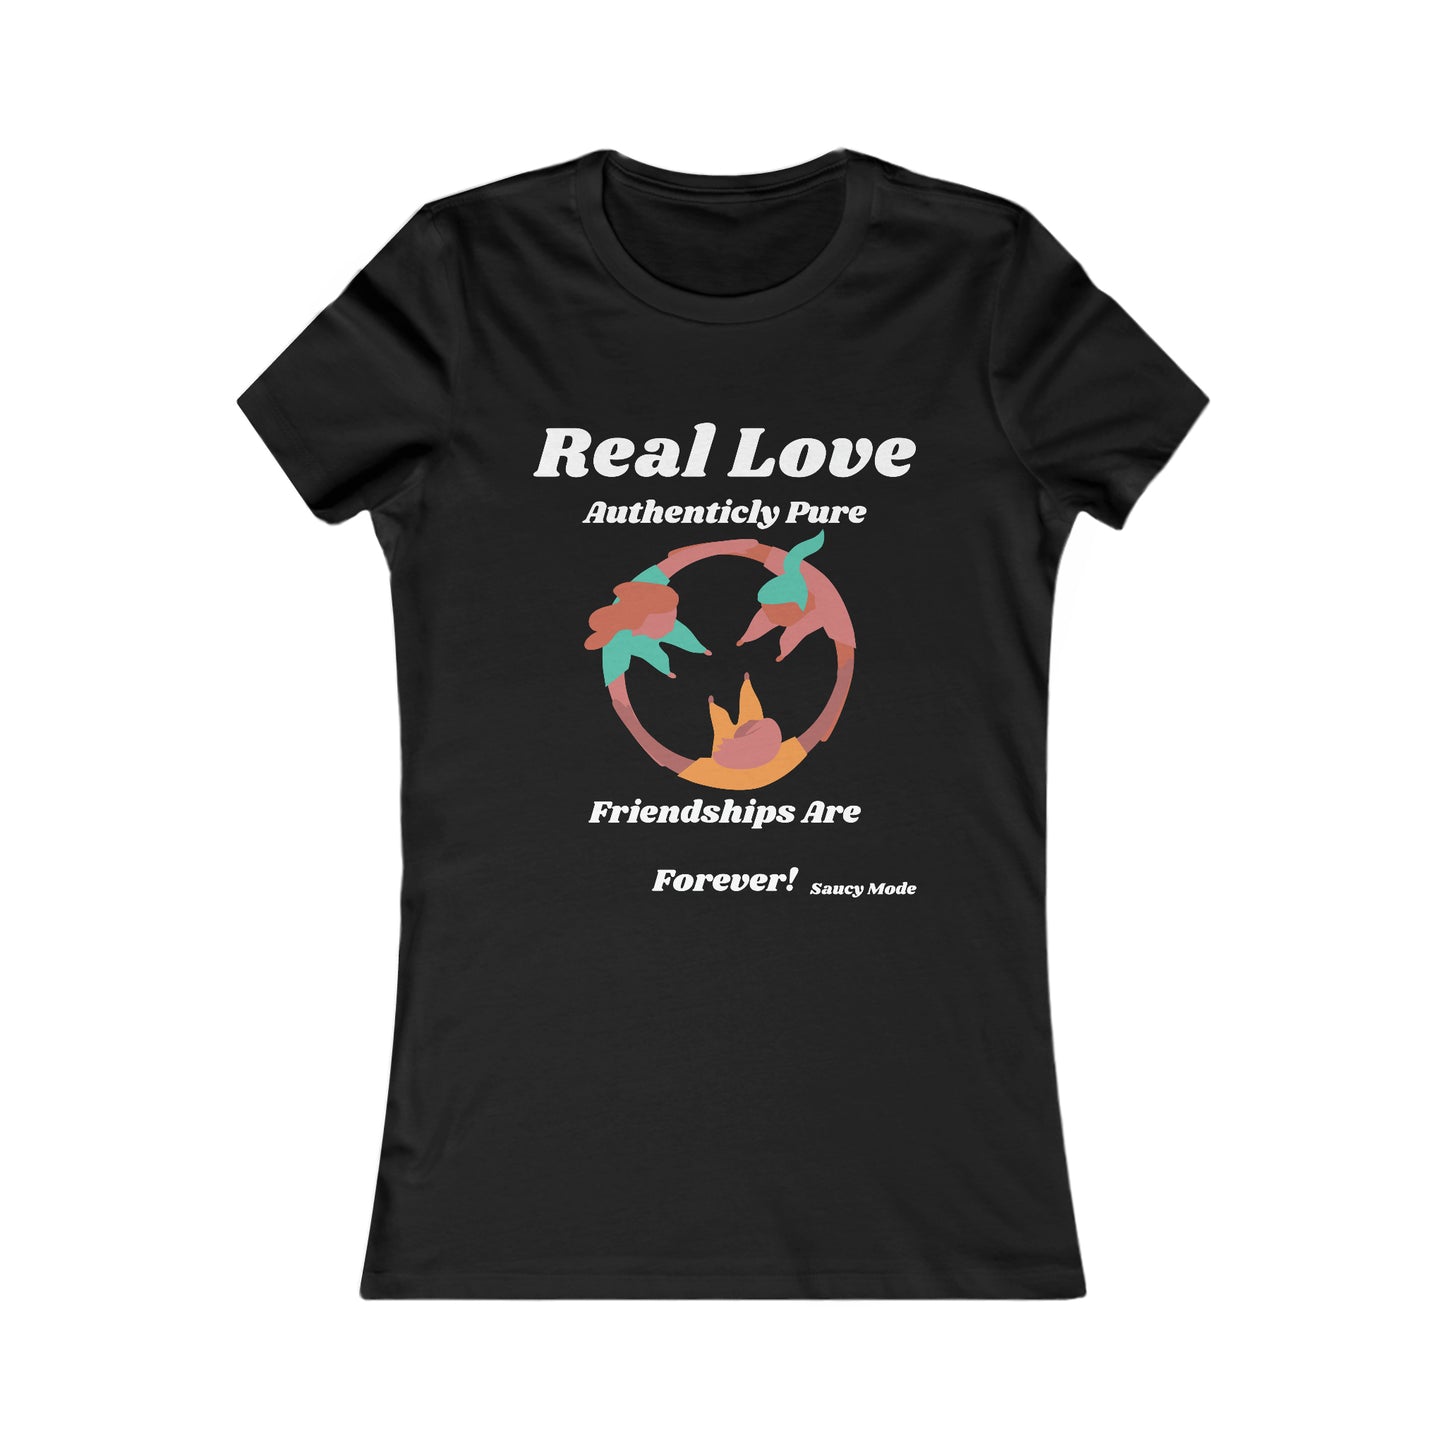 Real Love Authentic And Pure Friendships Are Forever T-Shirt More